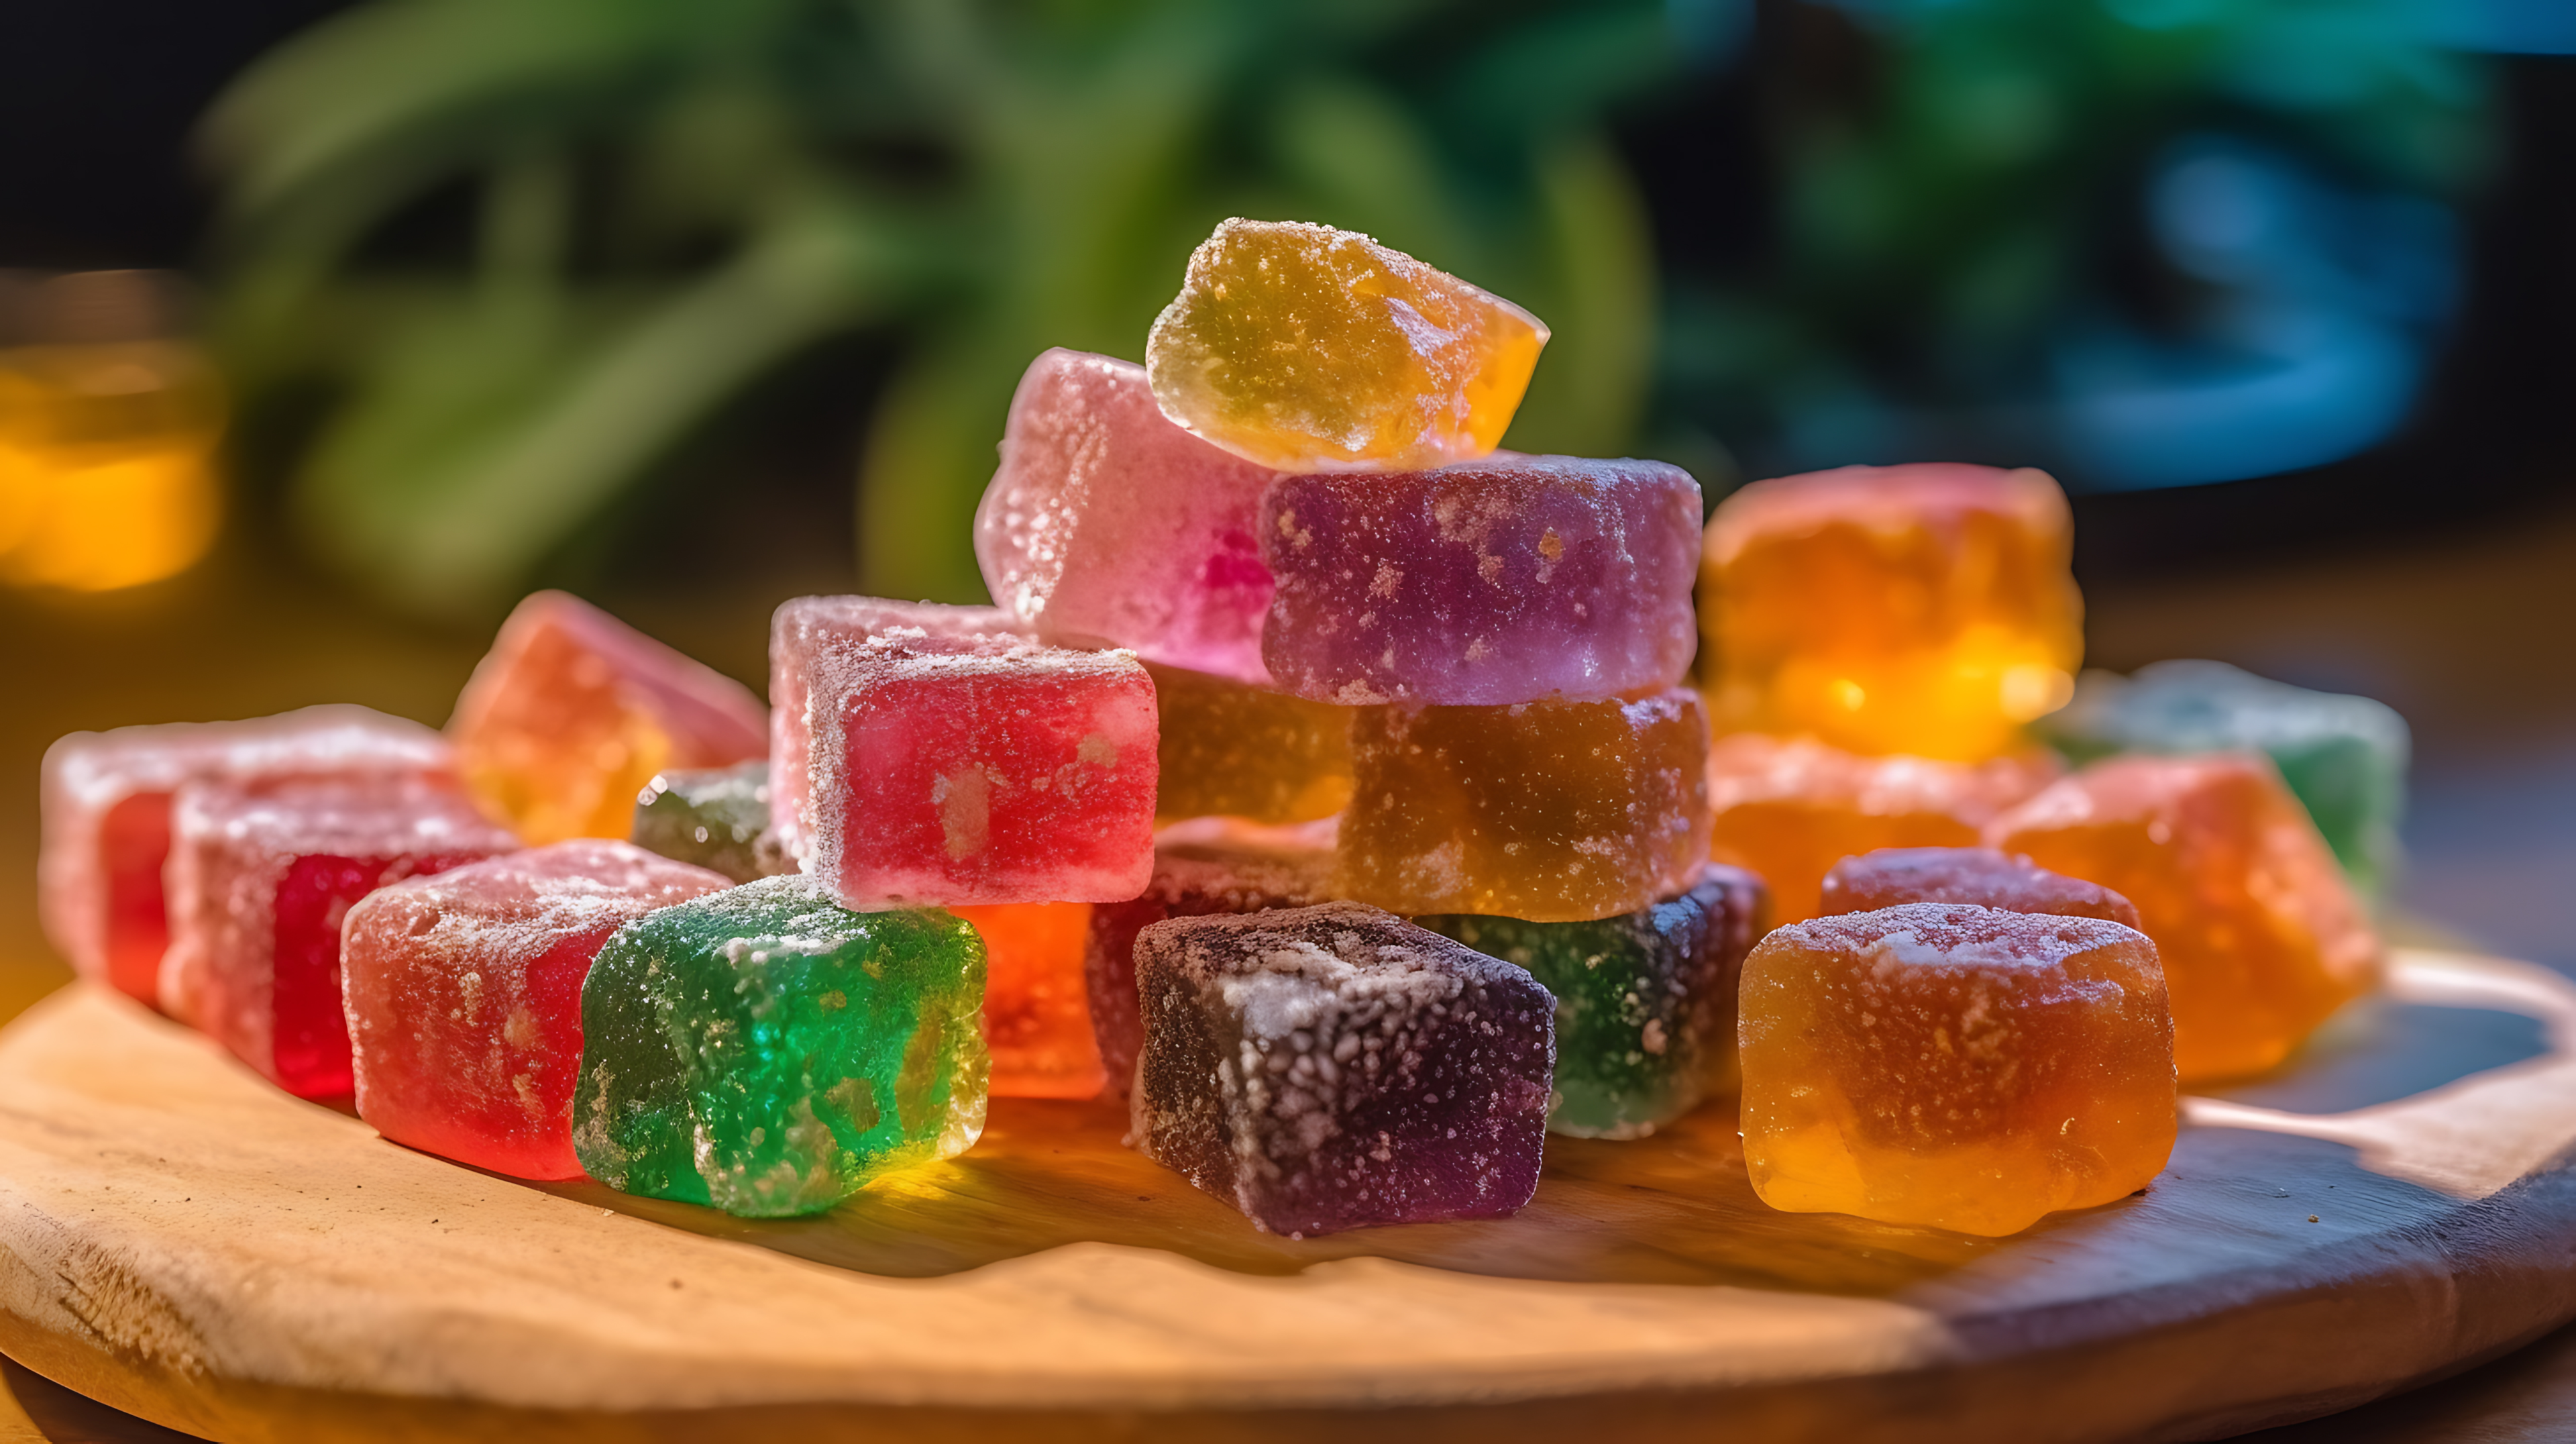 Our Delta 9 THC gummies go through rigorous testing, made with the highest quality ingredients to ensure we avoid potential negative effects as much as possible. Every product from Delta 9 THC gummies to any full spectrum or broad spectrum product is tested in-house and via third party.